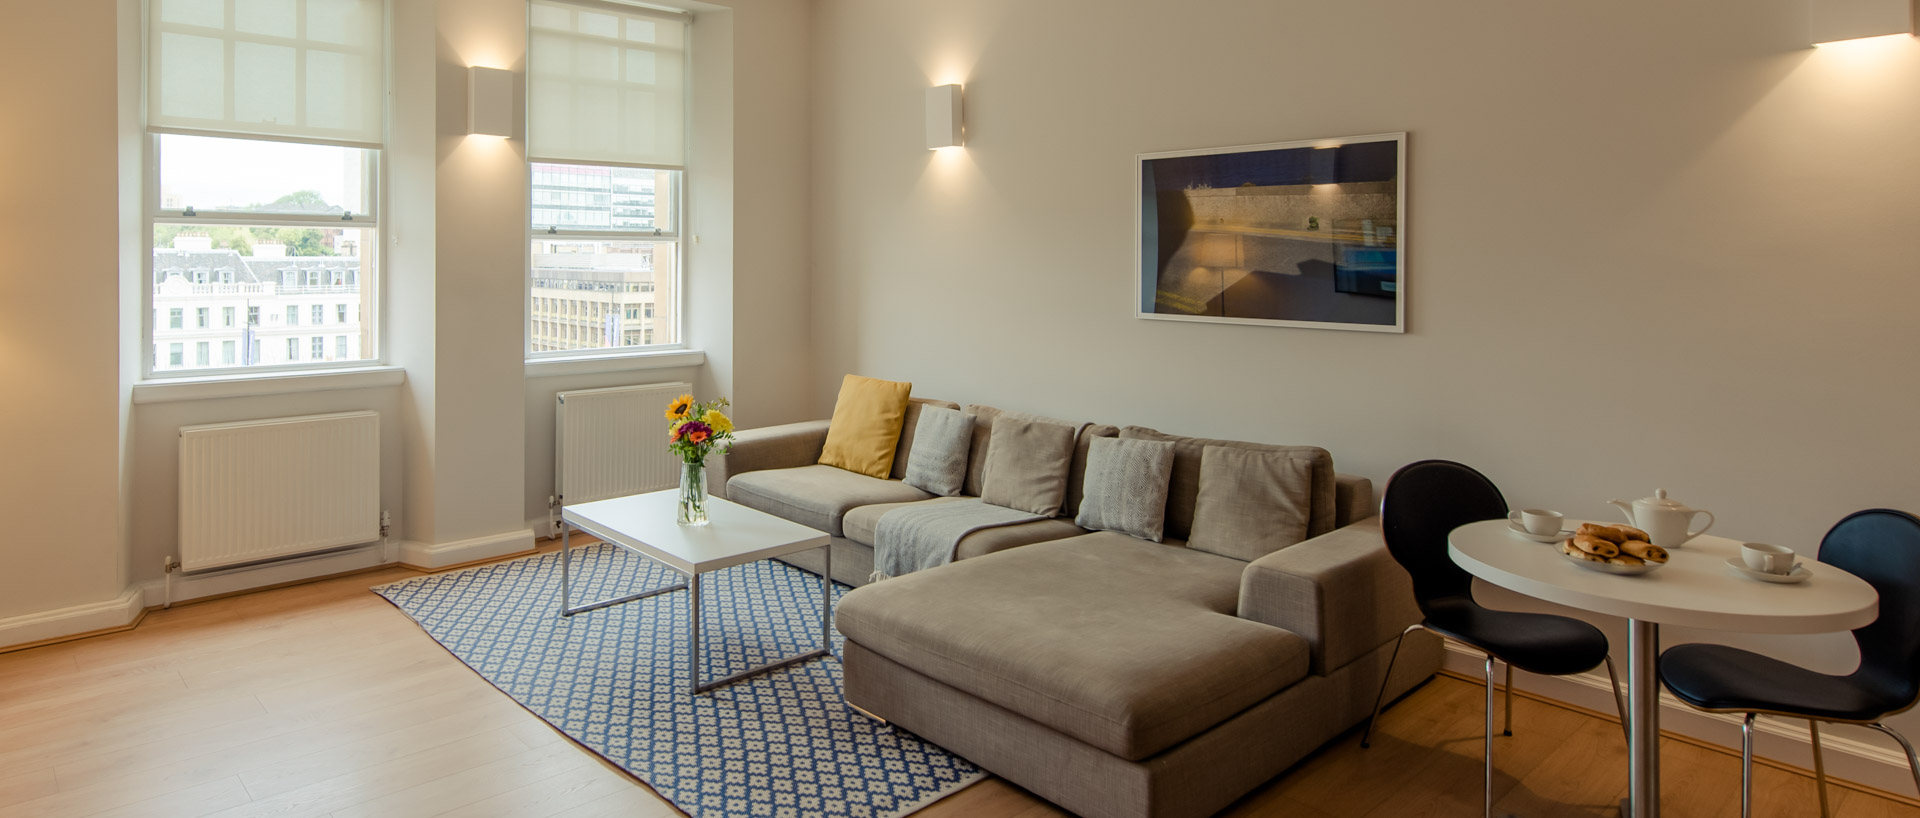 Corporate-Accommodation-Glasgow---Short-Let-Serviced-Apartments-in-central-Glasgow-Scotland---Urban-Stay-2